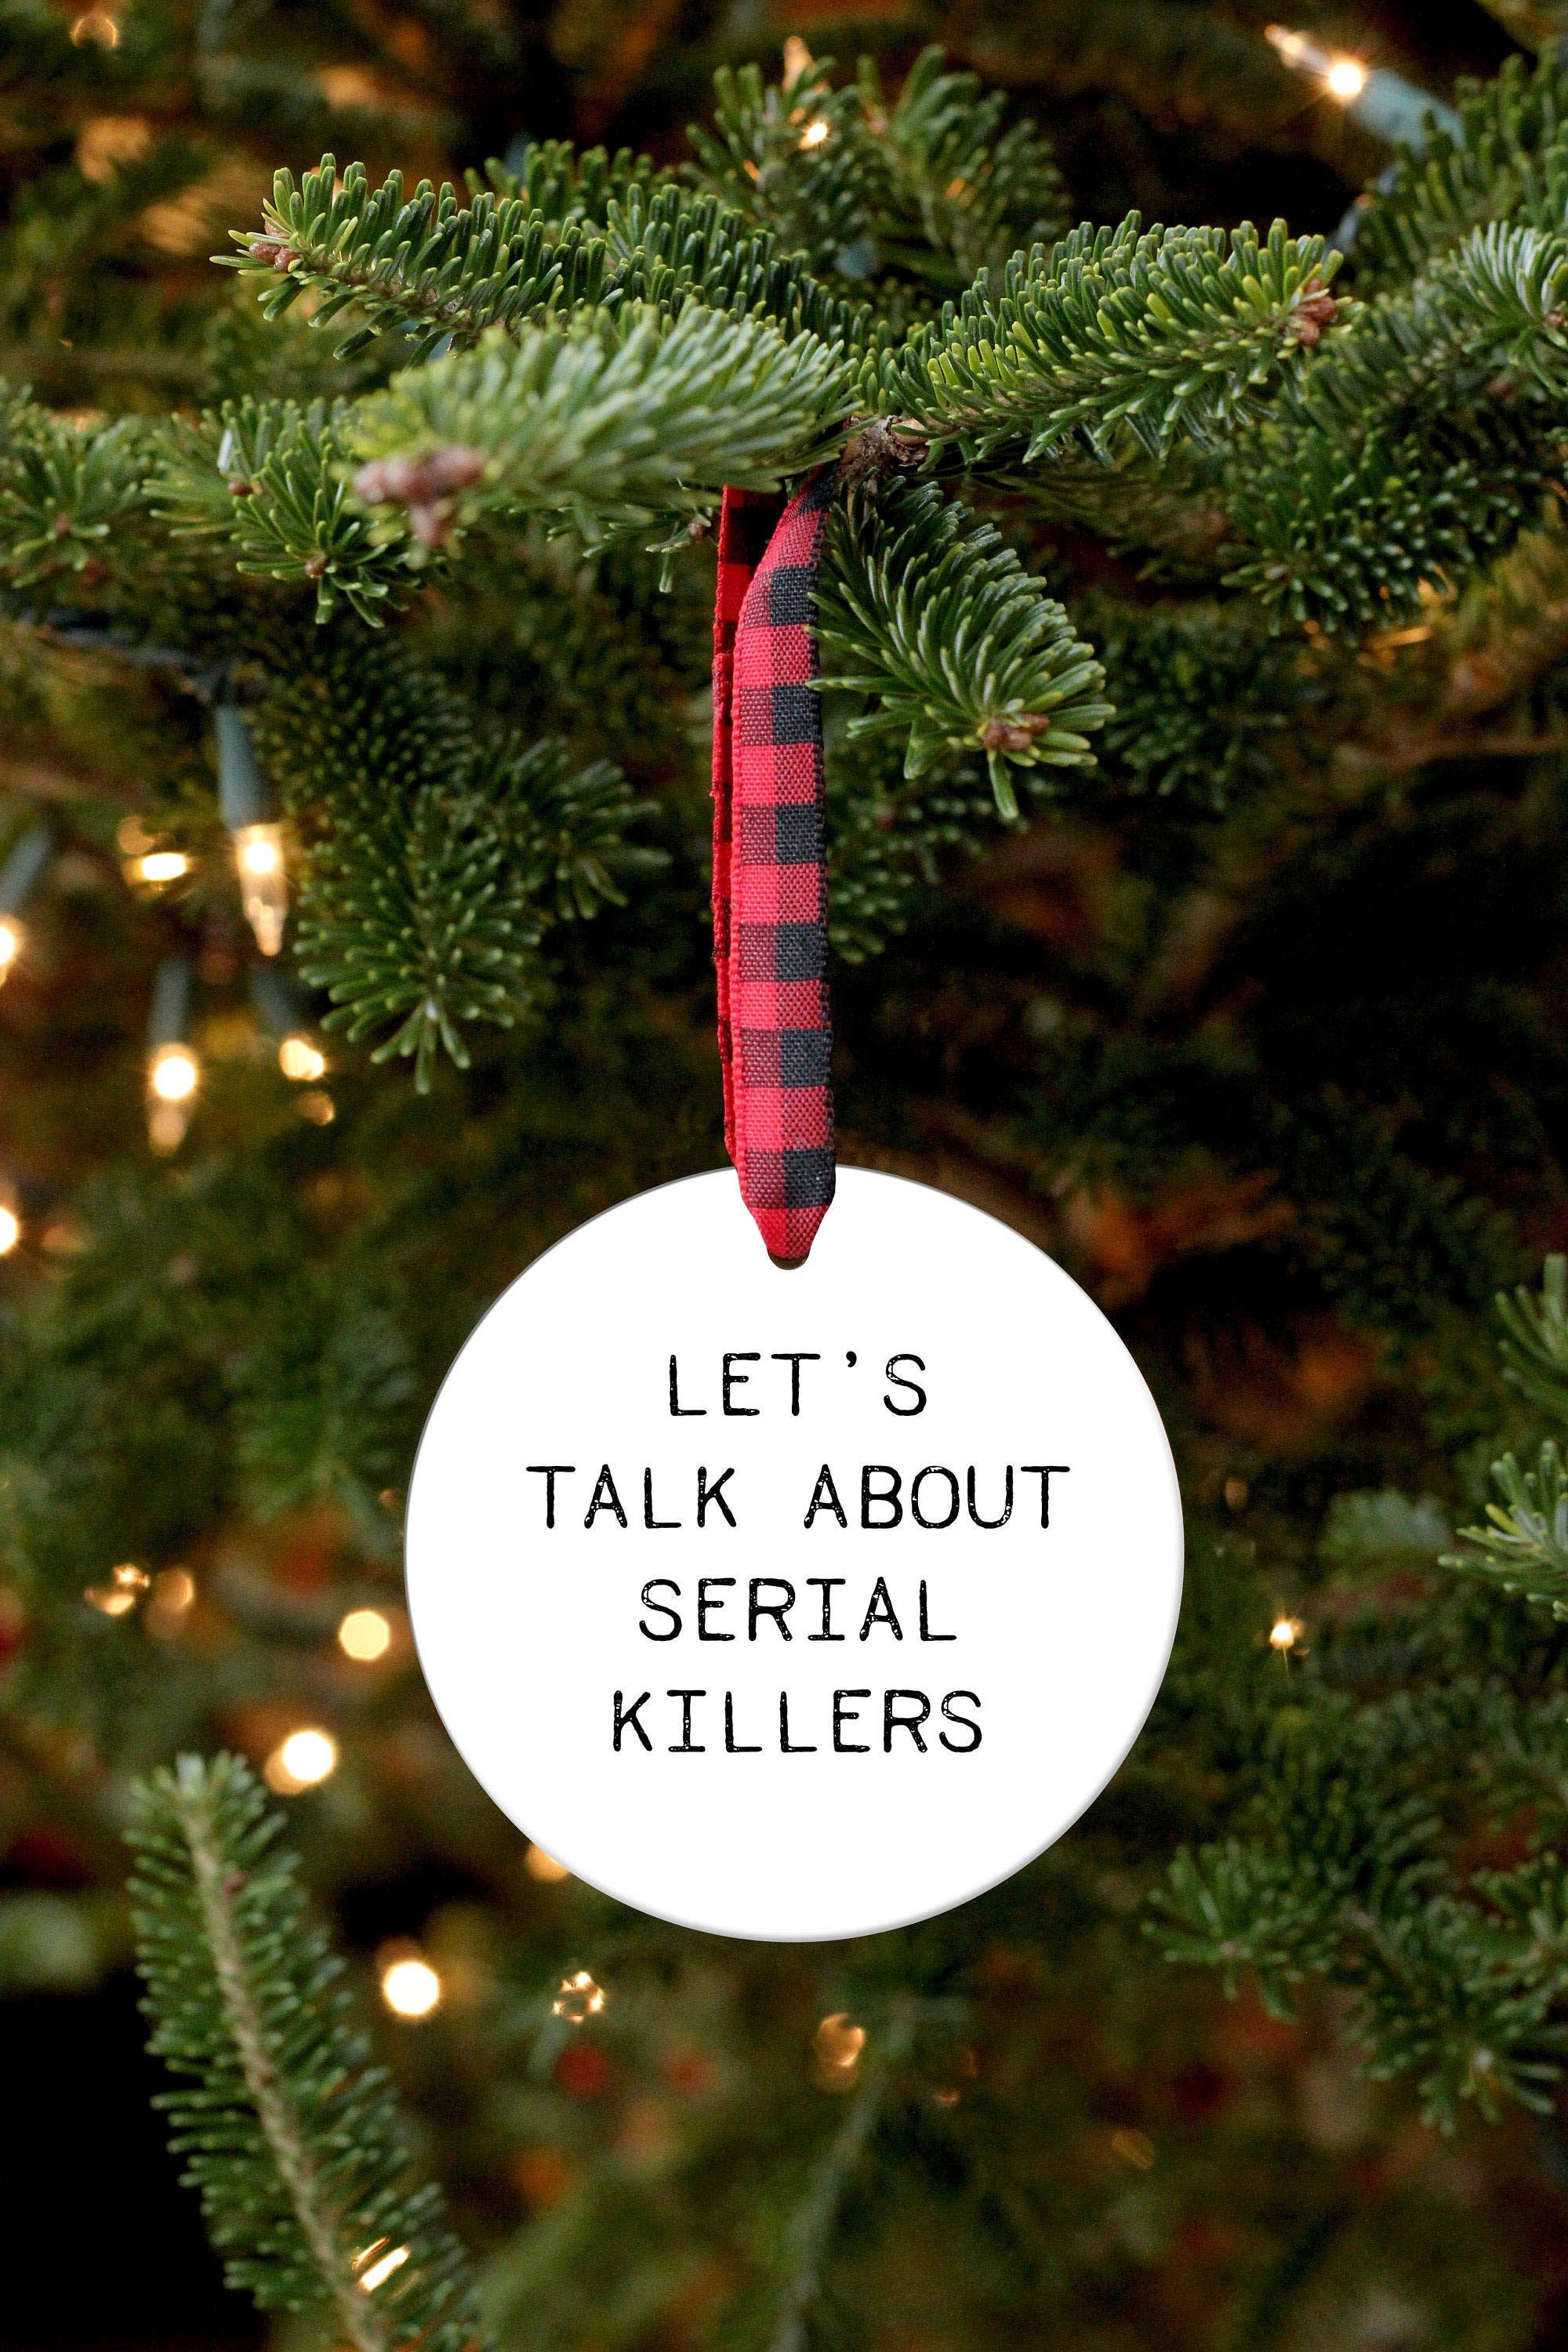 Let’s Talk About Serial Killers Ornament - Funny holiday ornament